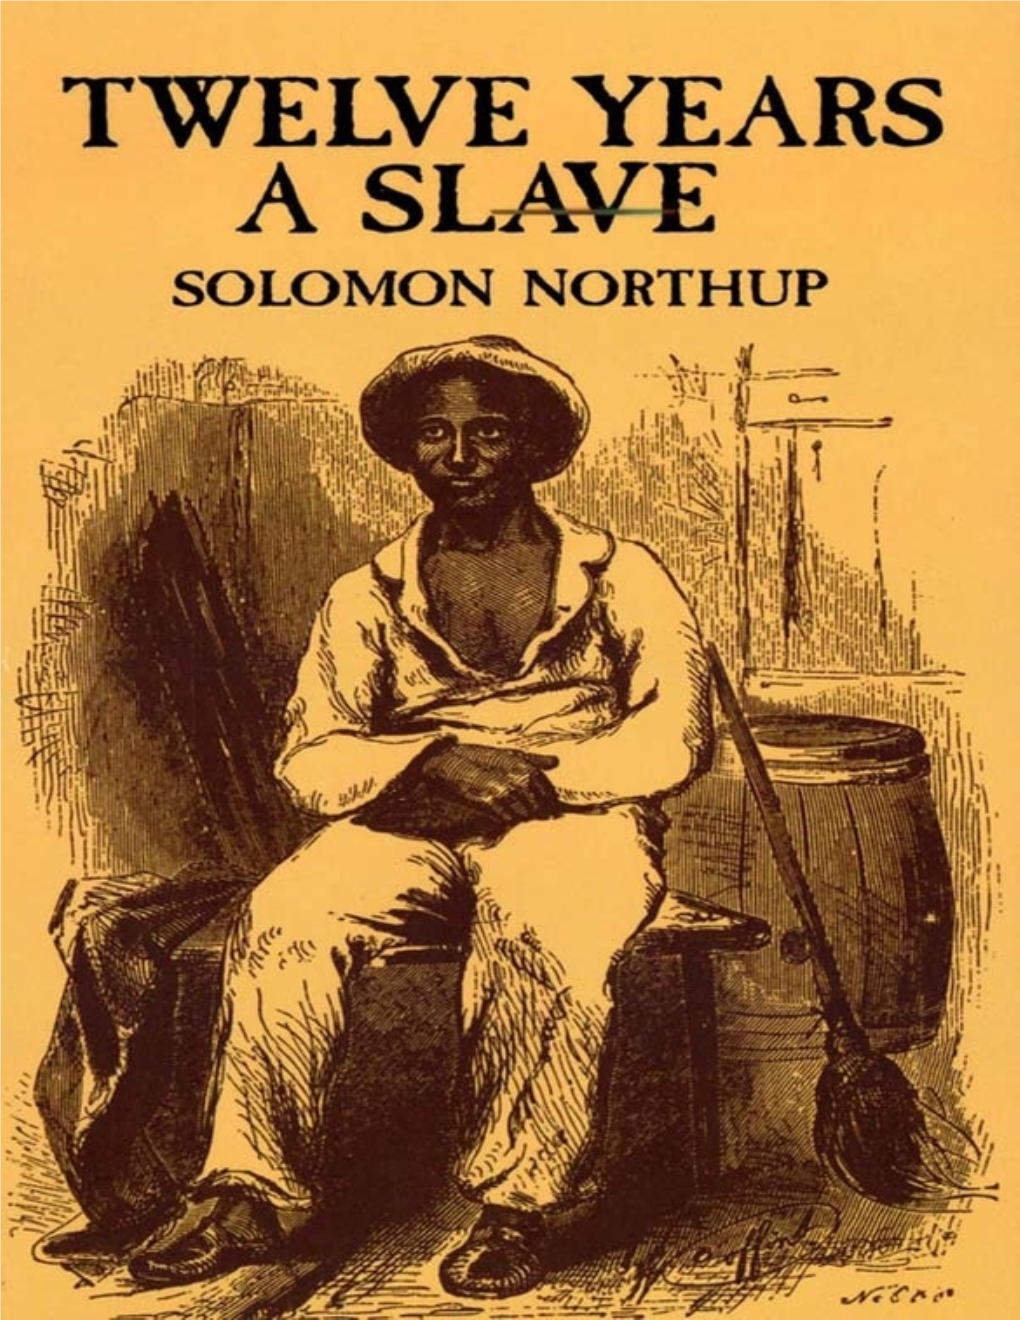 Twelve Years a Slave / Solomon Northup ; Introduction by Philip S